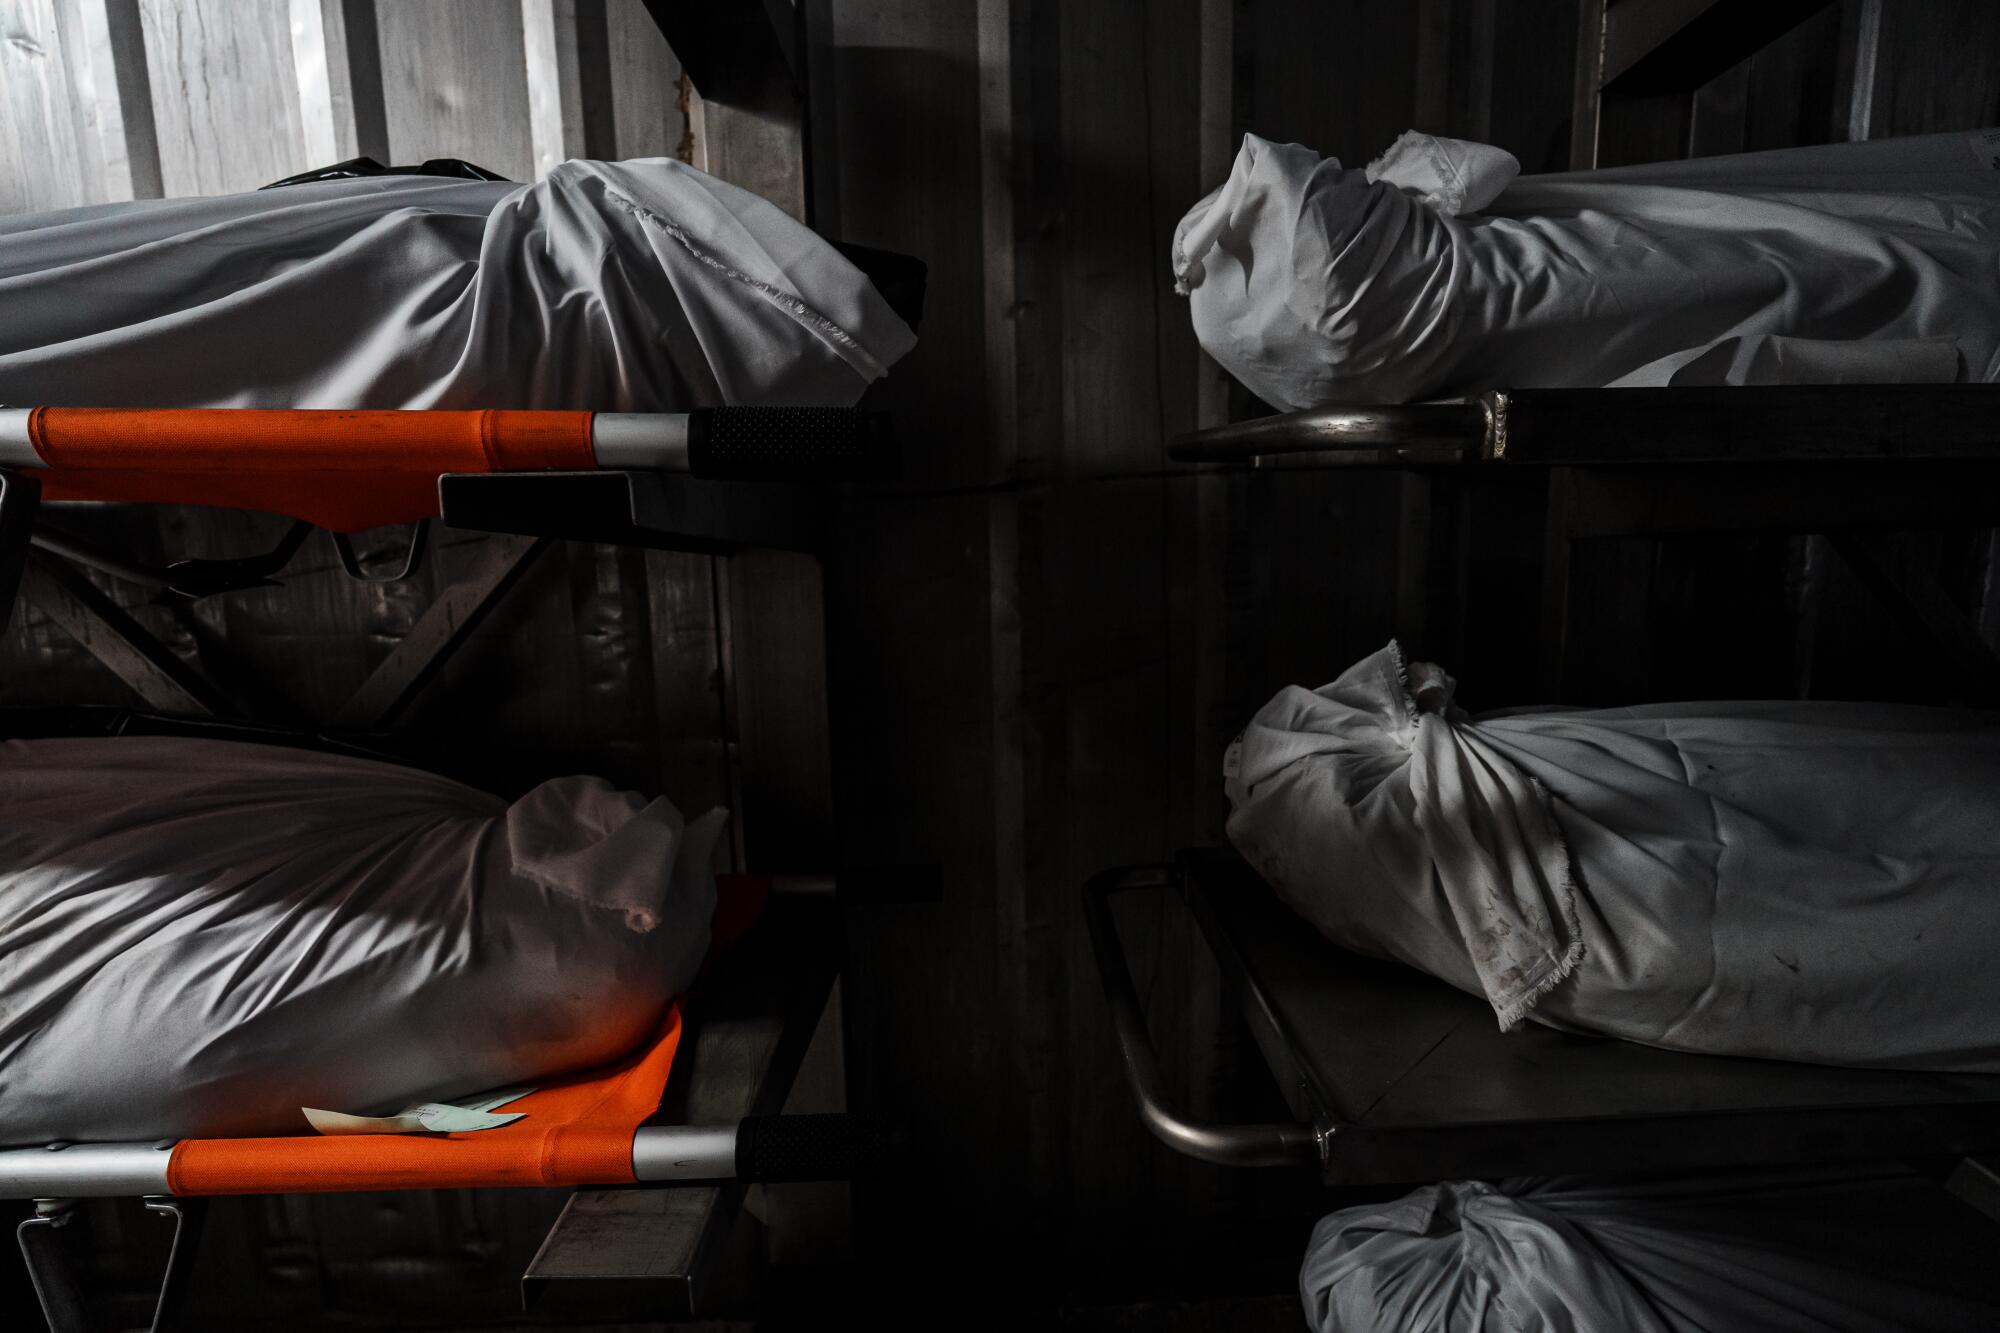 White body bags lie on stretchers in rows 